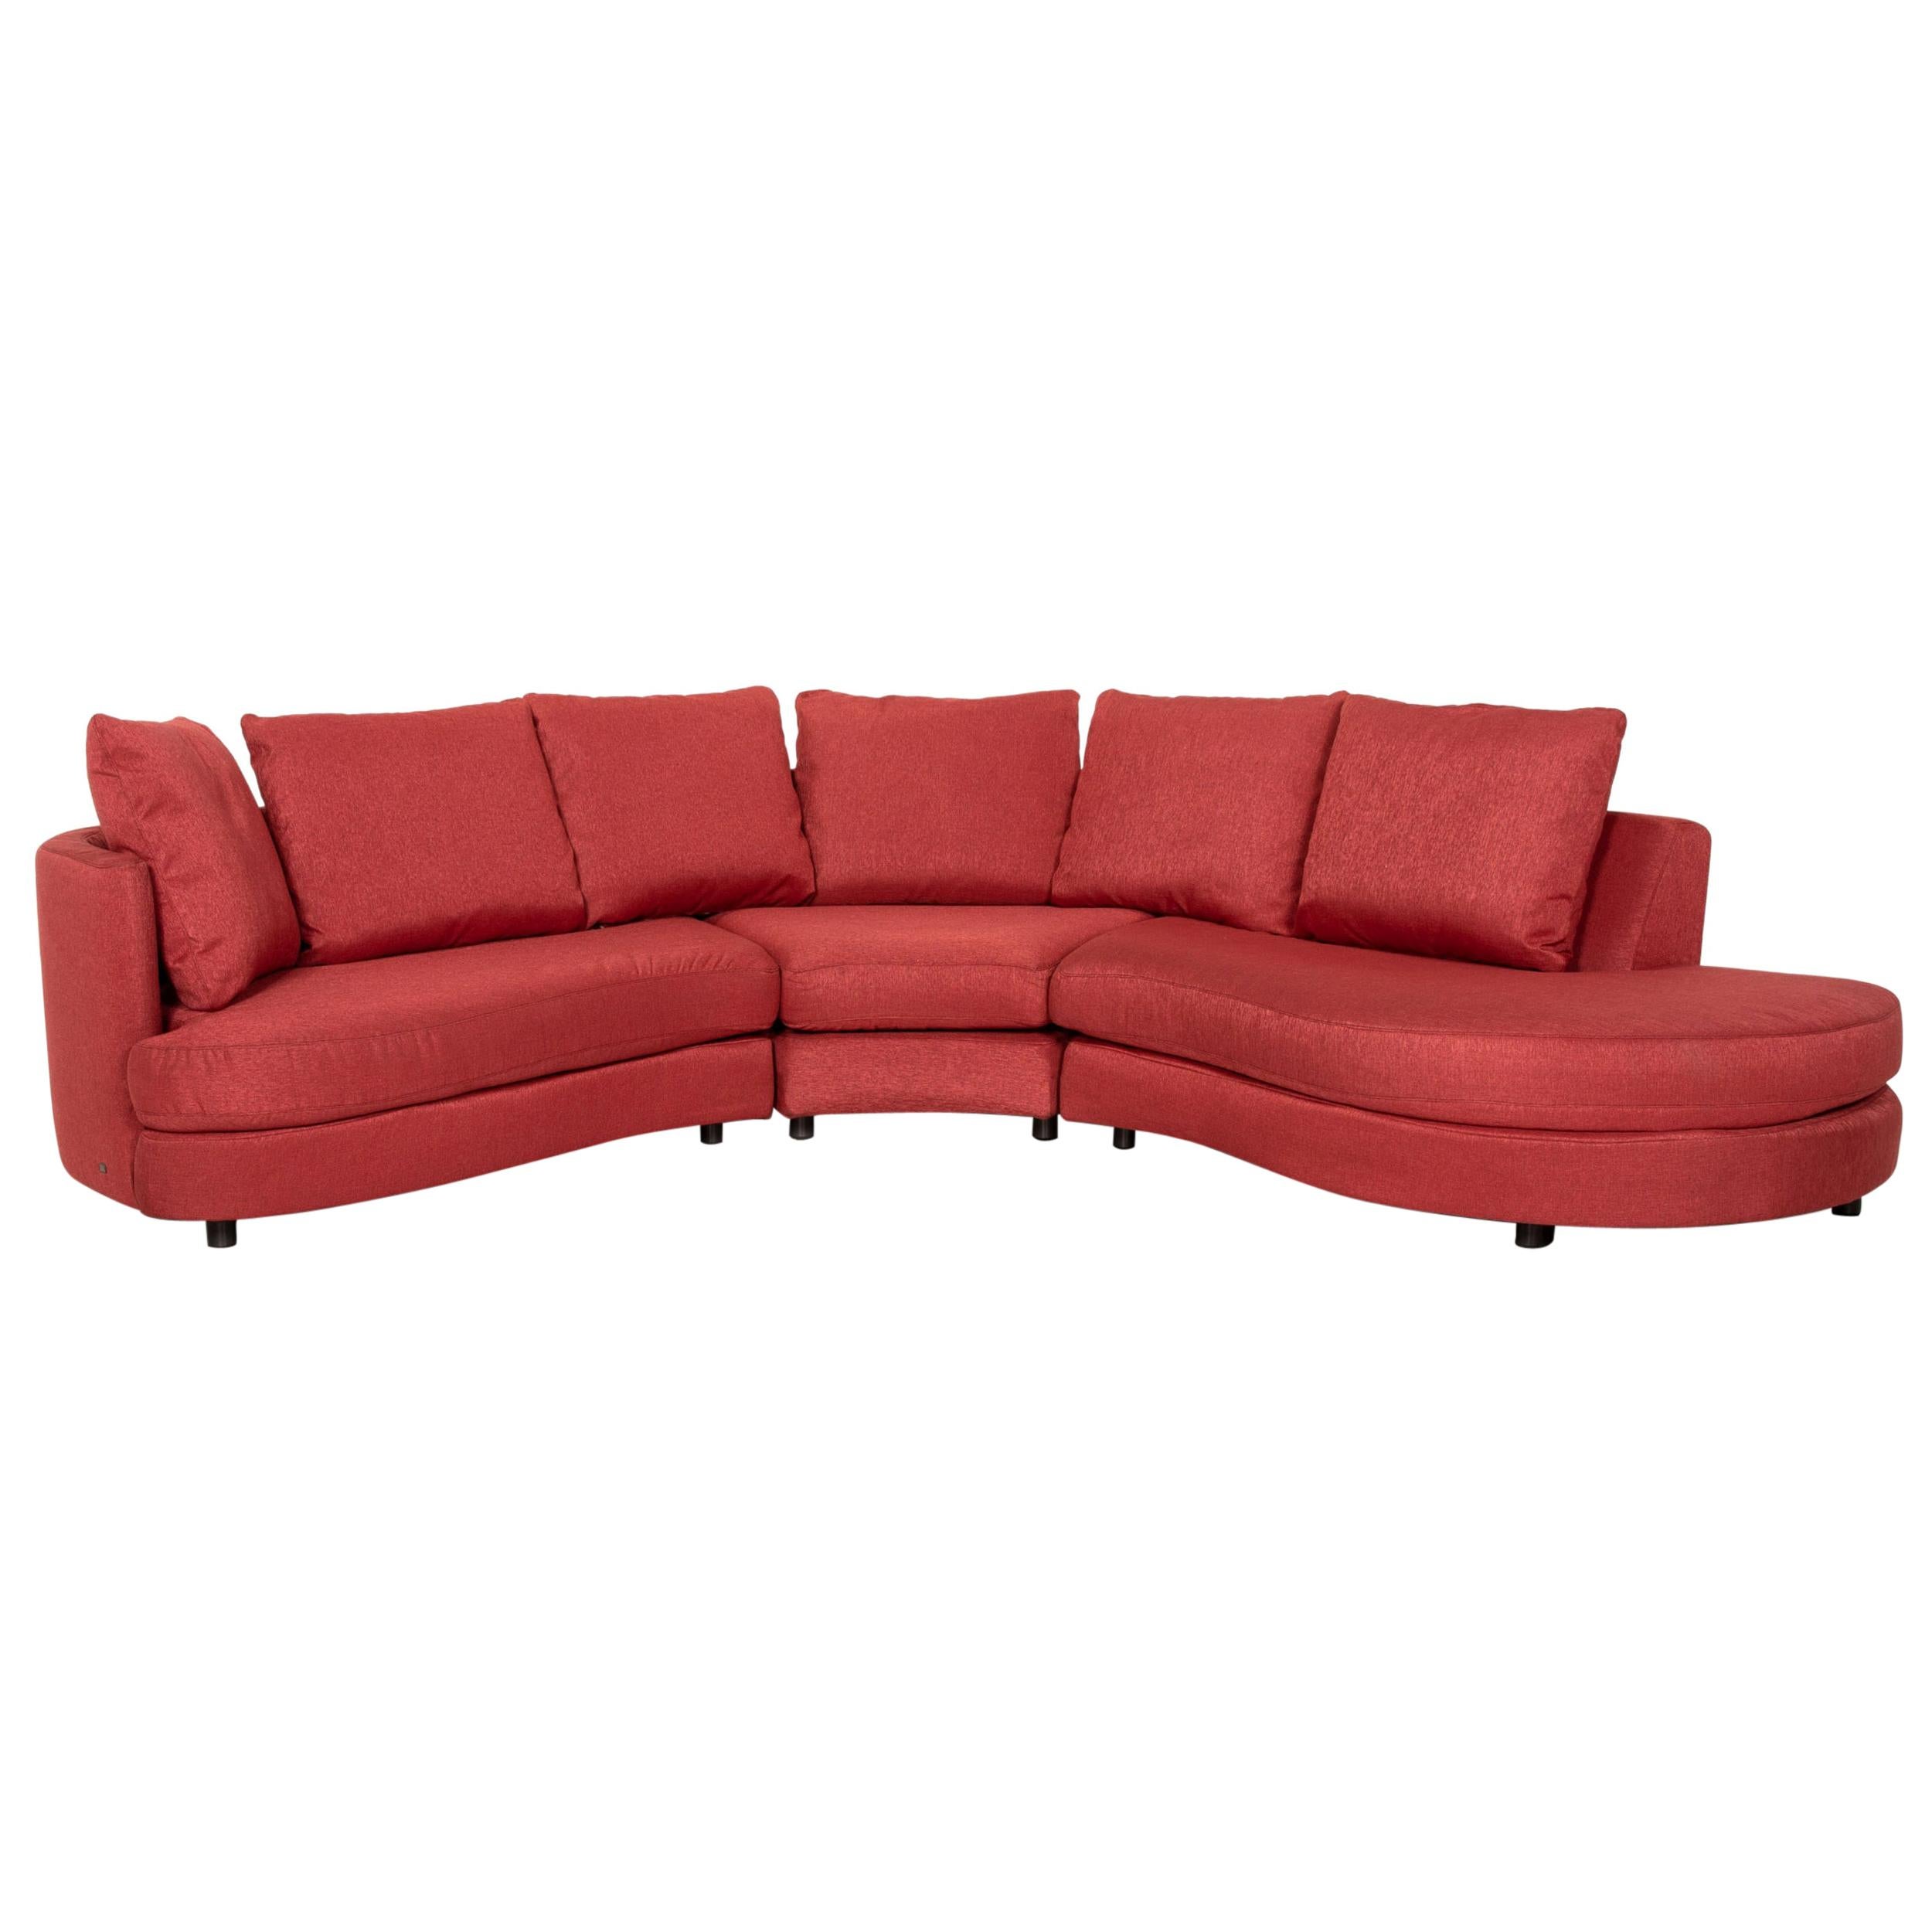 Rolf Benz Fabric Corner Sofa Red Sofa Couch For Sale